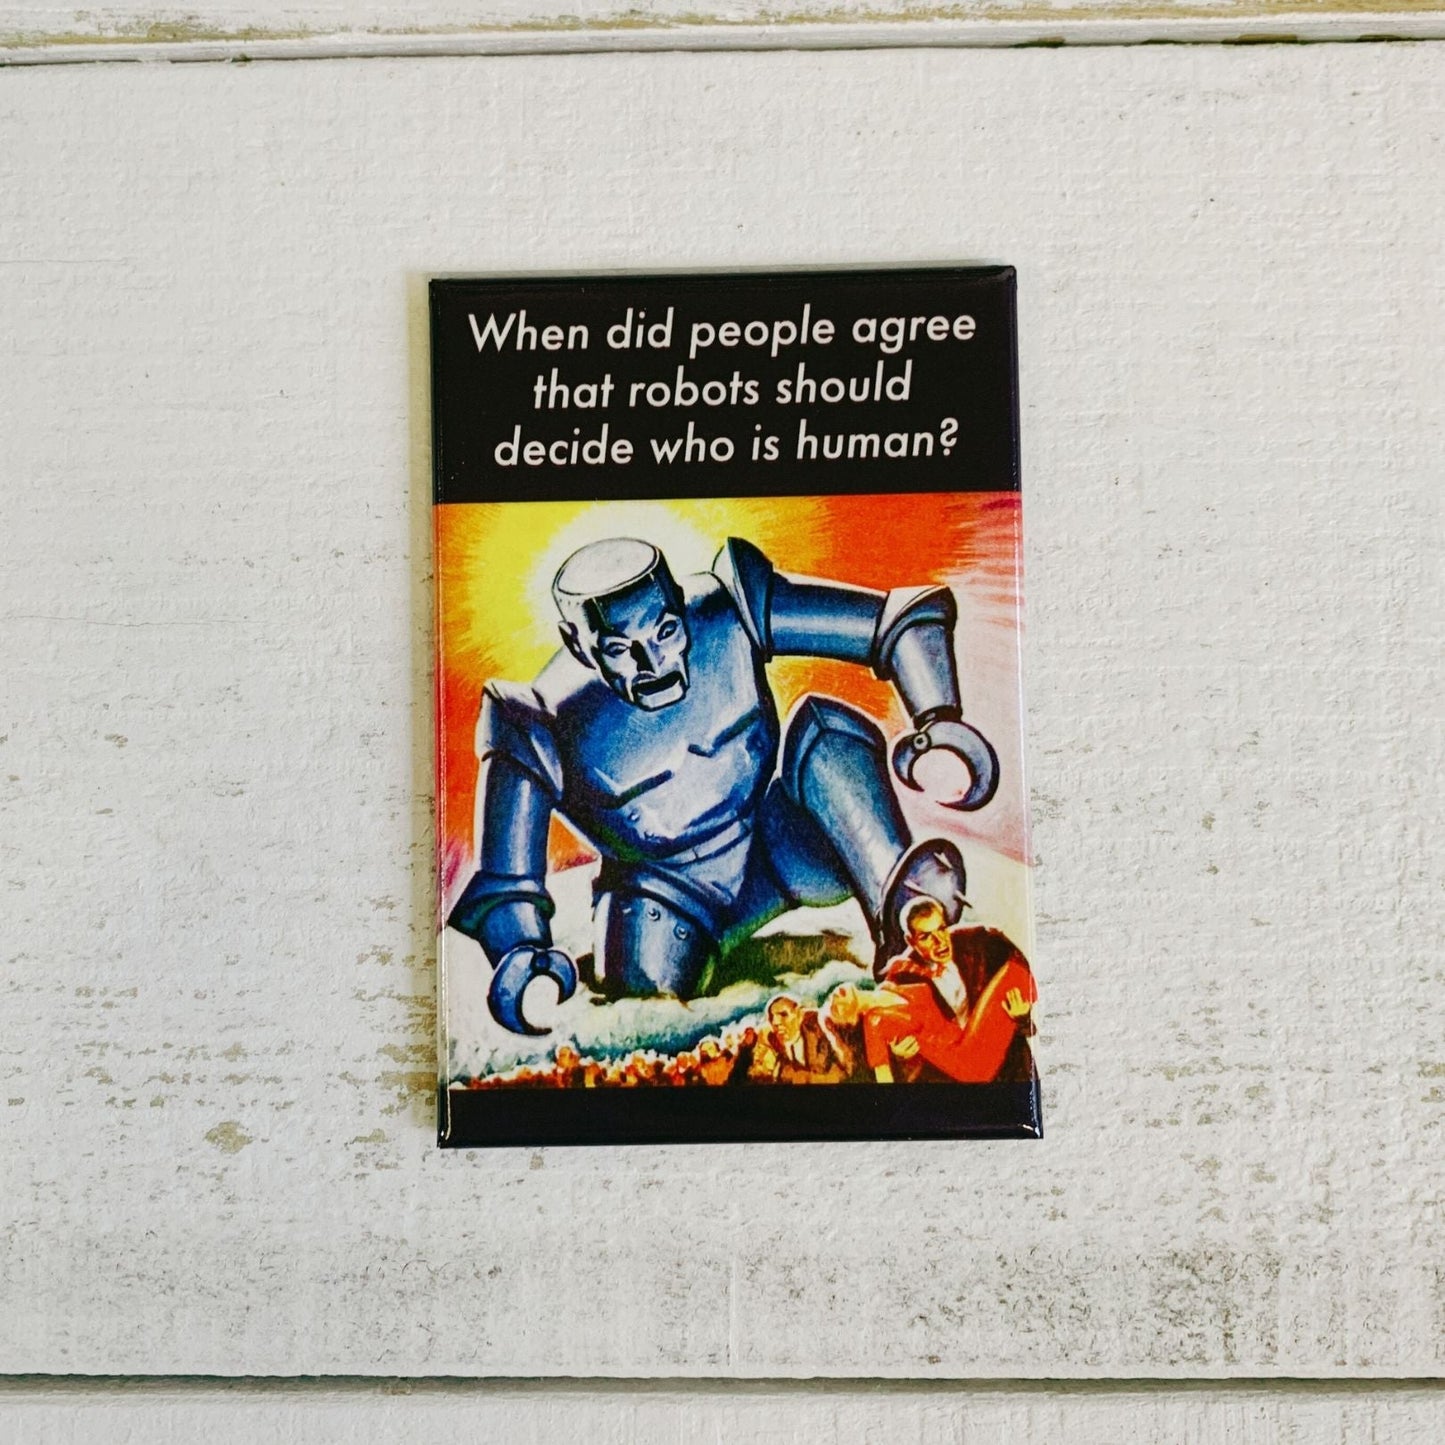 When Did People Agree That Robots Should Decide Who Is Human? Rectangular Magnet | Refrigerator Magnet Decor | 3" x 2"